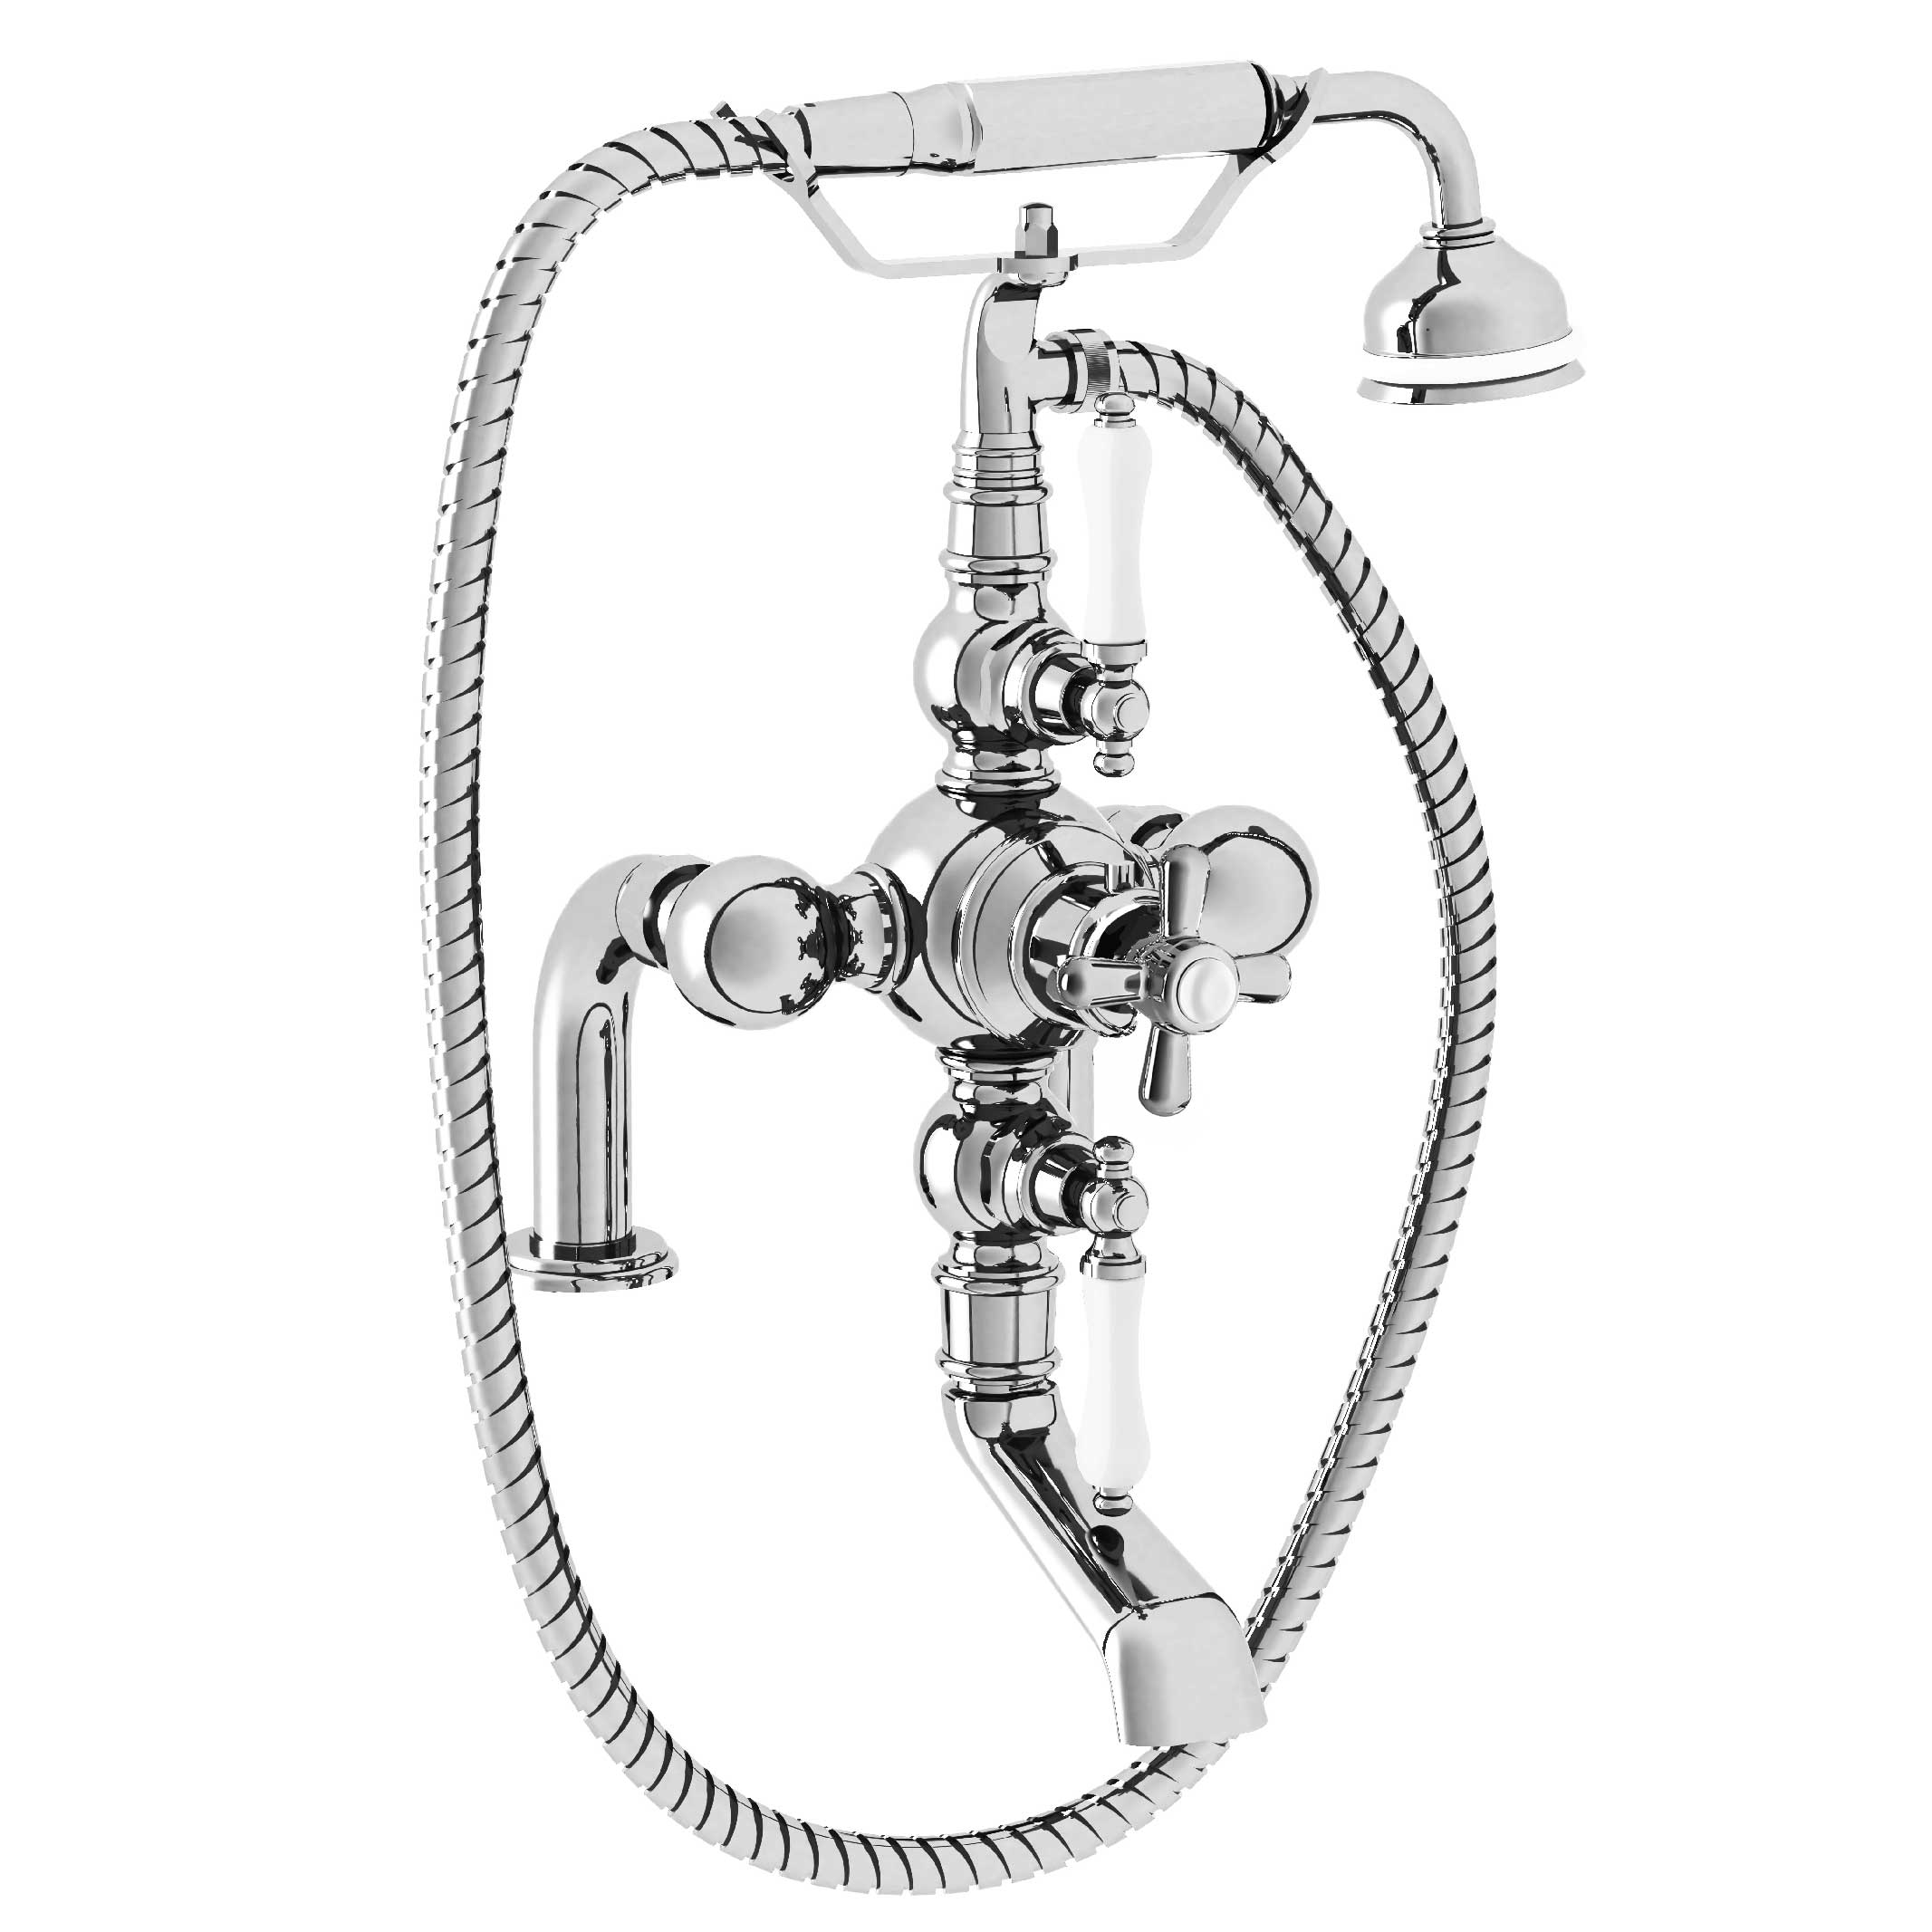 M40-3306T Rim mounted thermo. bath and shower mixer